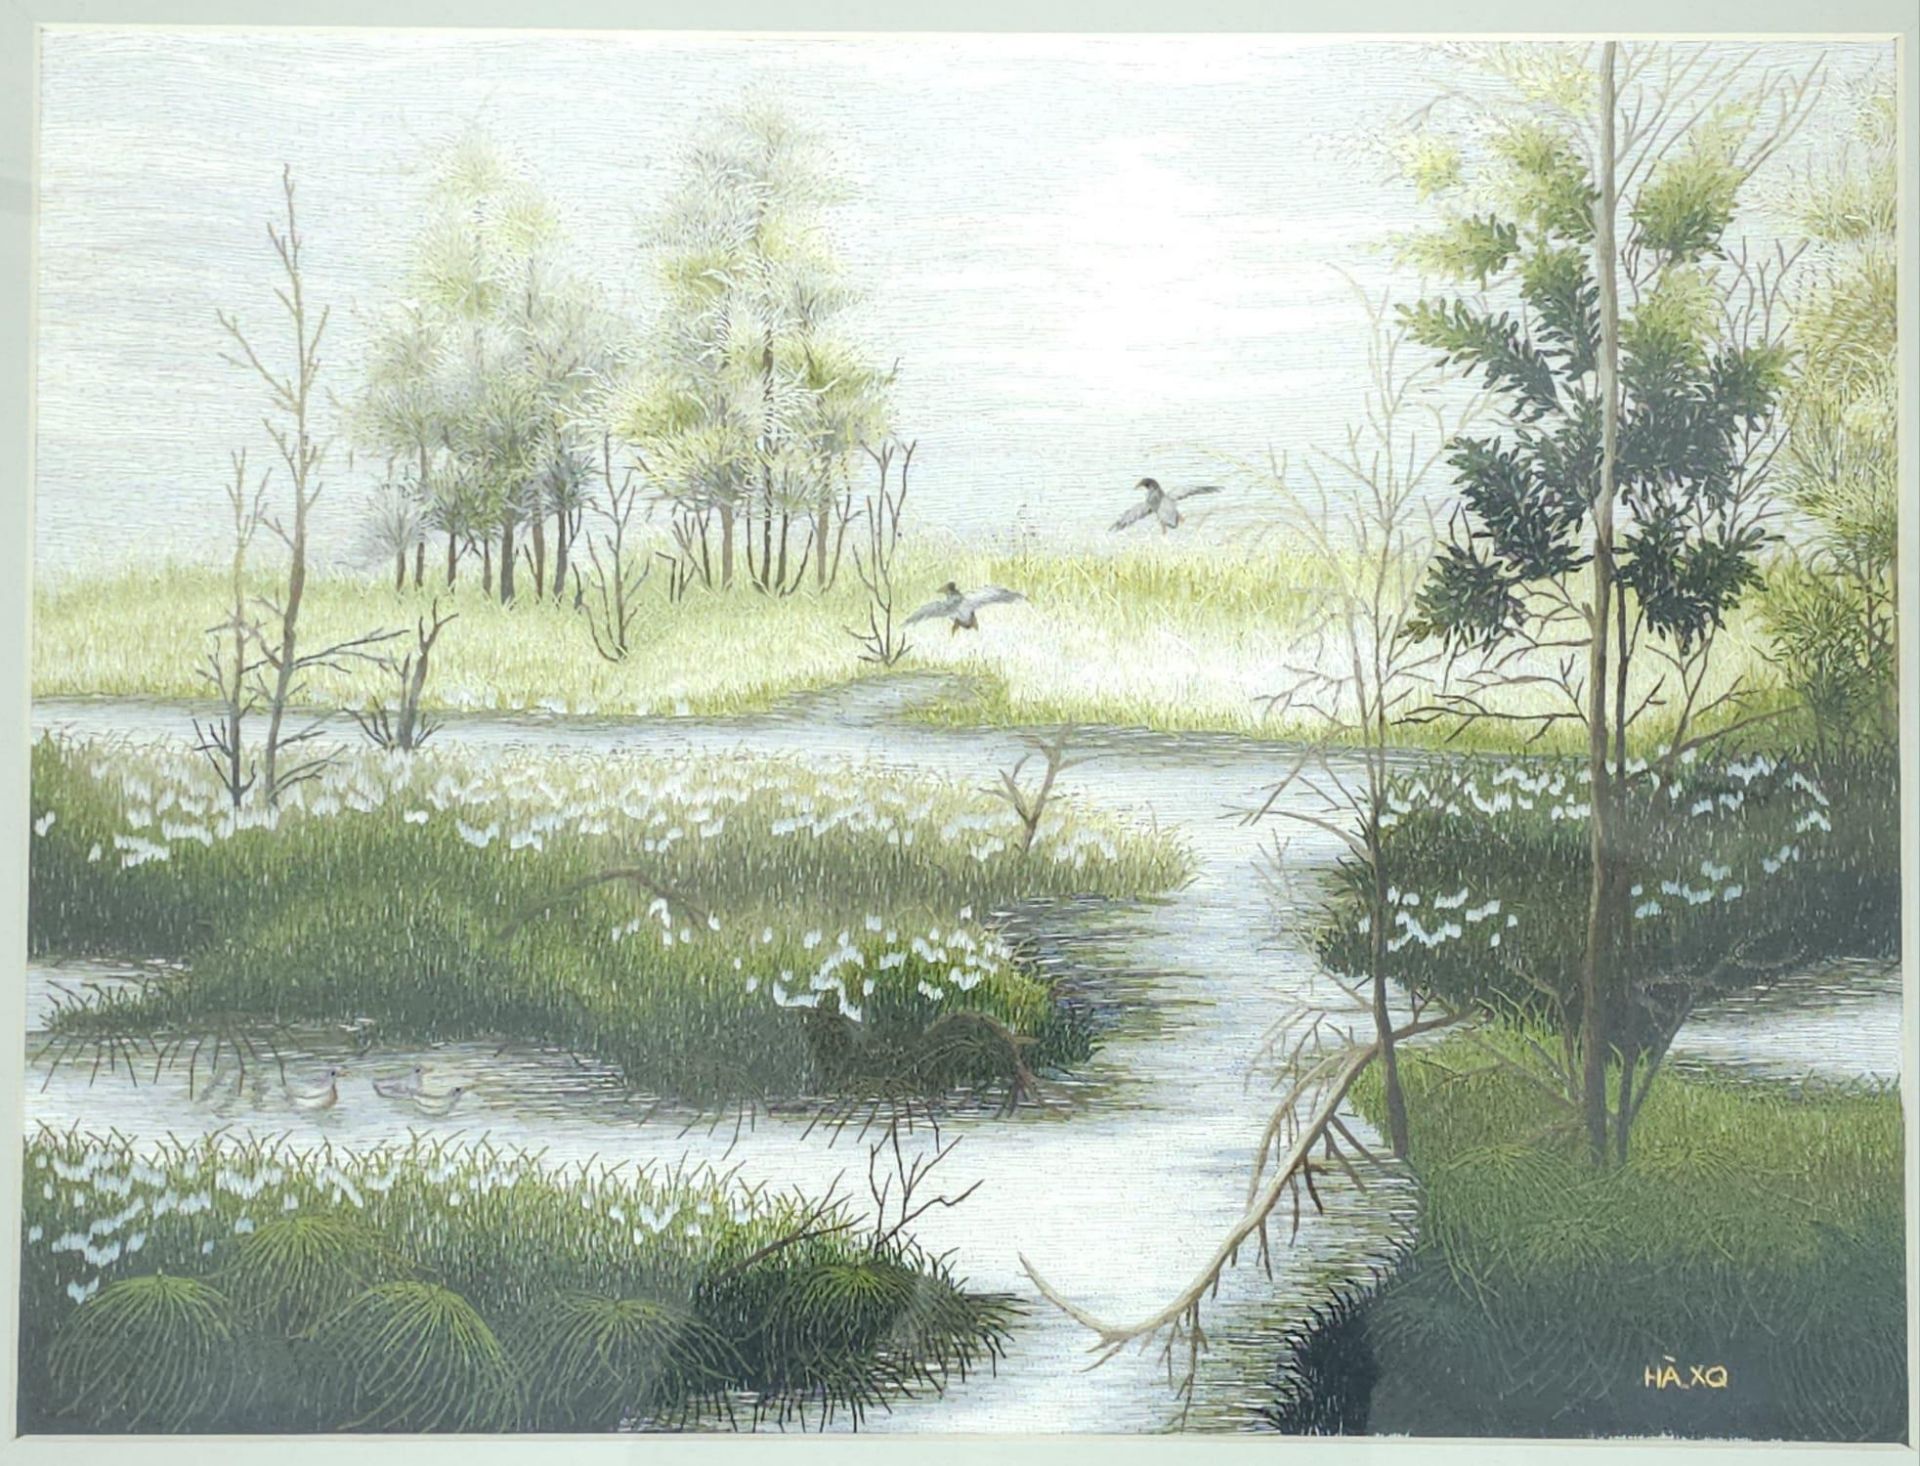 VIETNAMESE HAND EMBROIDERY ON SILK- LANDSCAPE, SIGNED HA XQ. BEAUTIFUL HAND EMBROIDERED ORIENTAL - Image 2 of 6